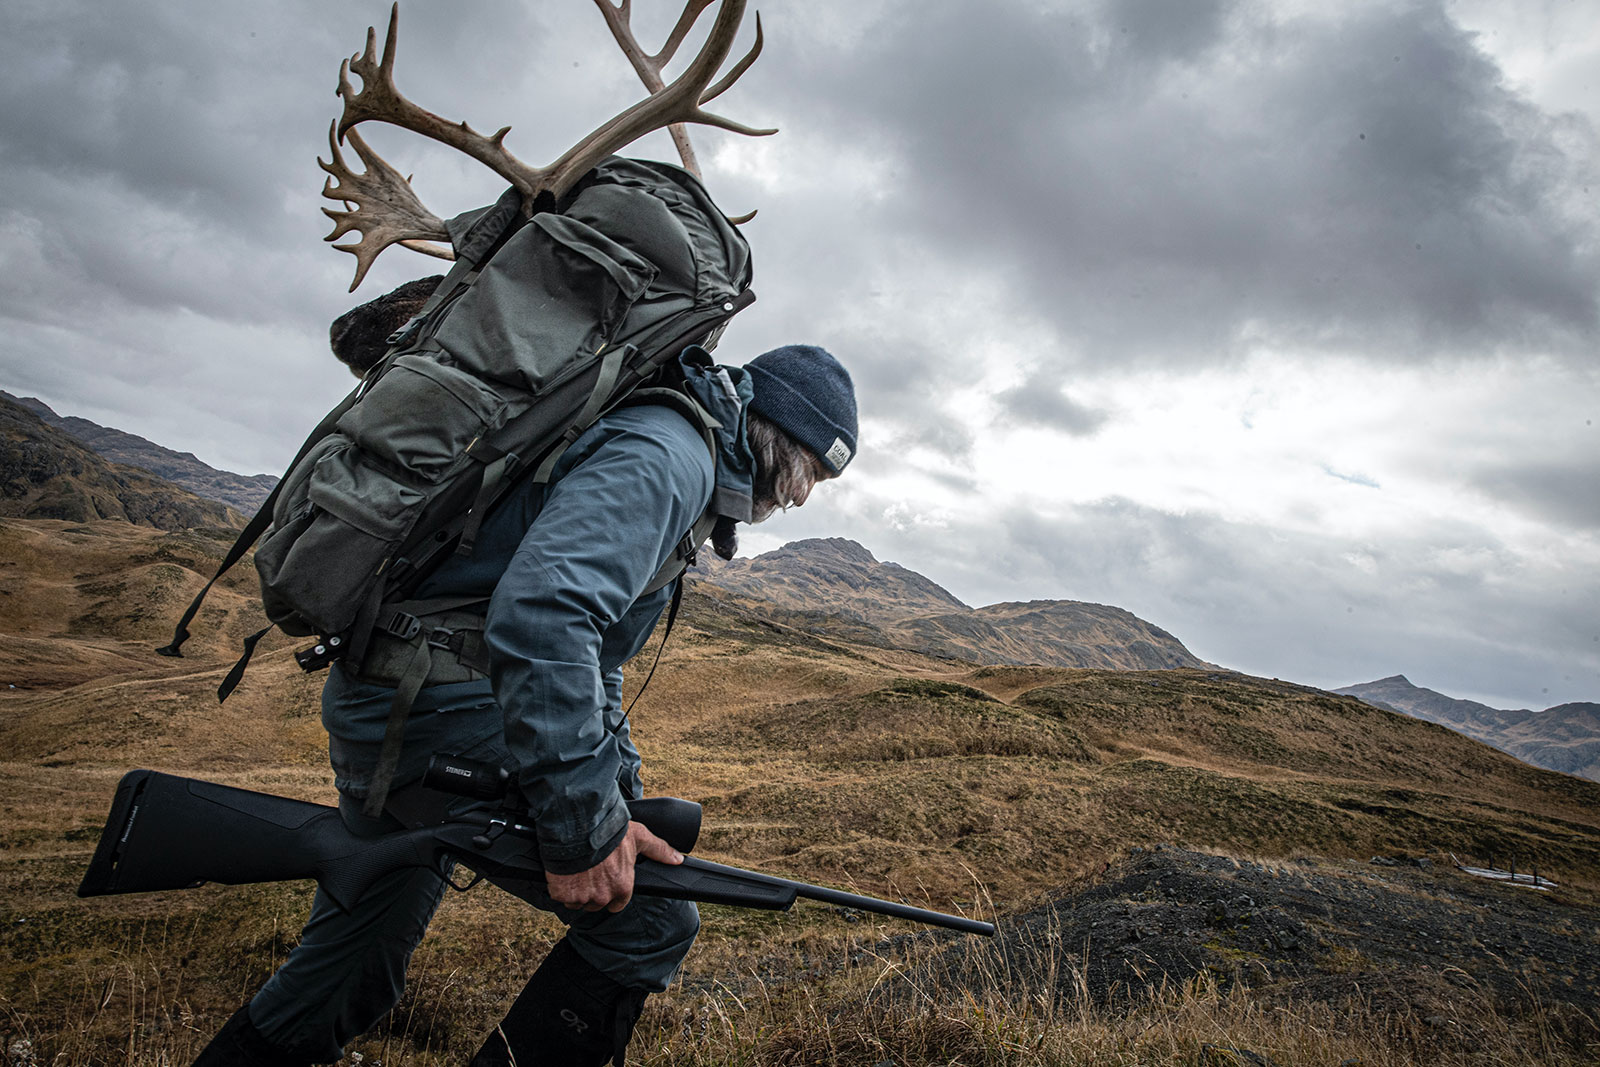 Donnie Vincent carrying the Benelli LUPO bolt-action rifle through the hilly terrain of Adak Island, Alaska while hauling the antlers of his caribou hunt on his pack.